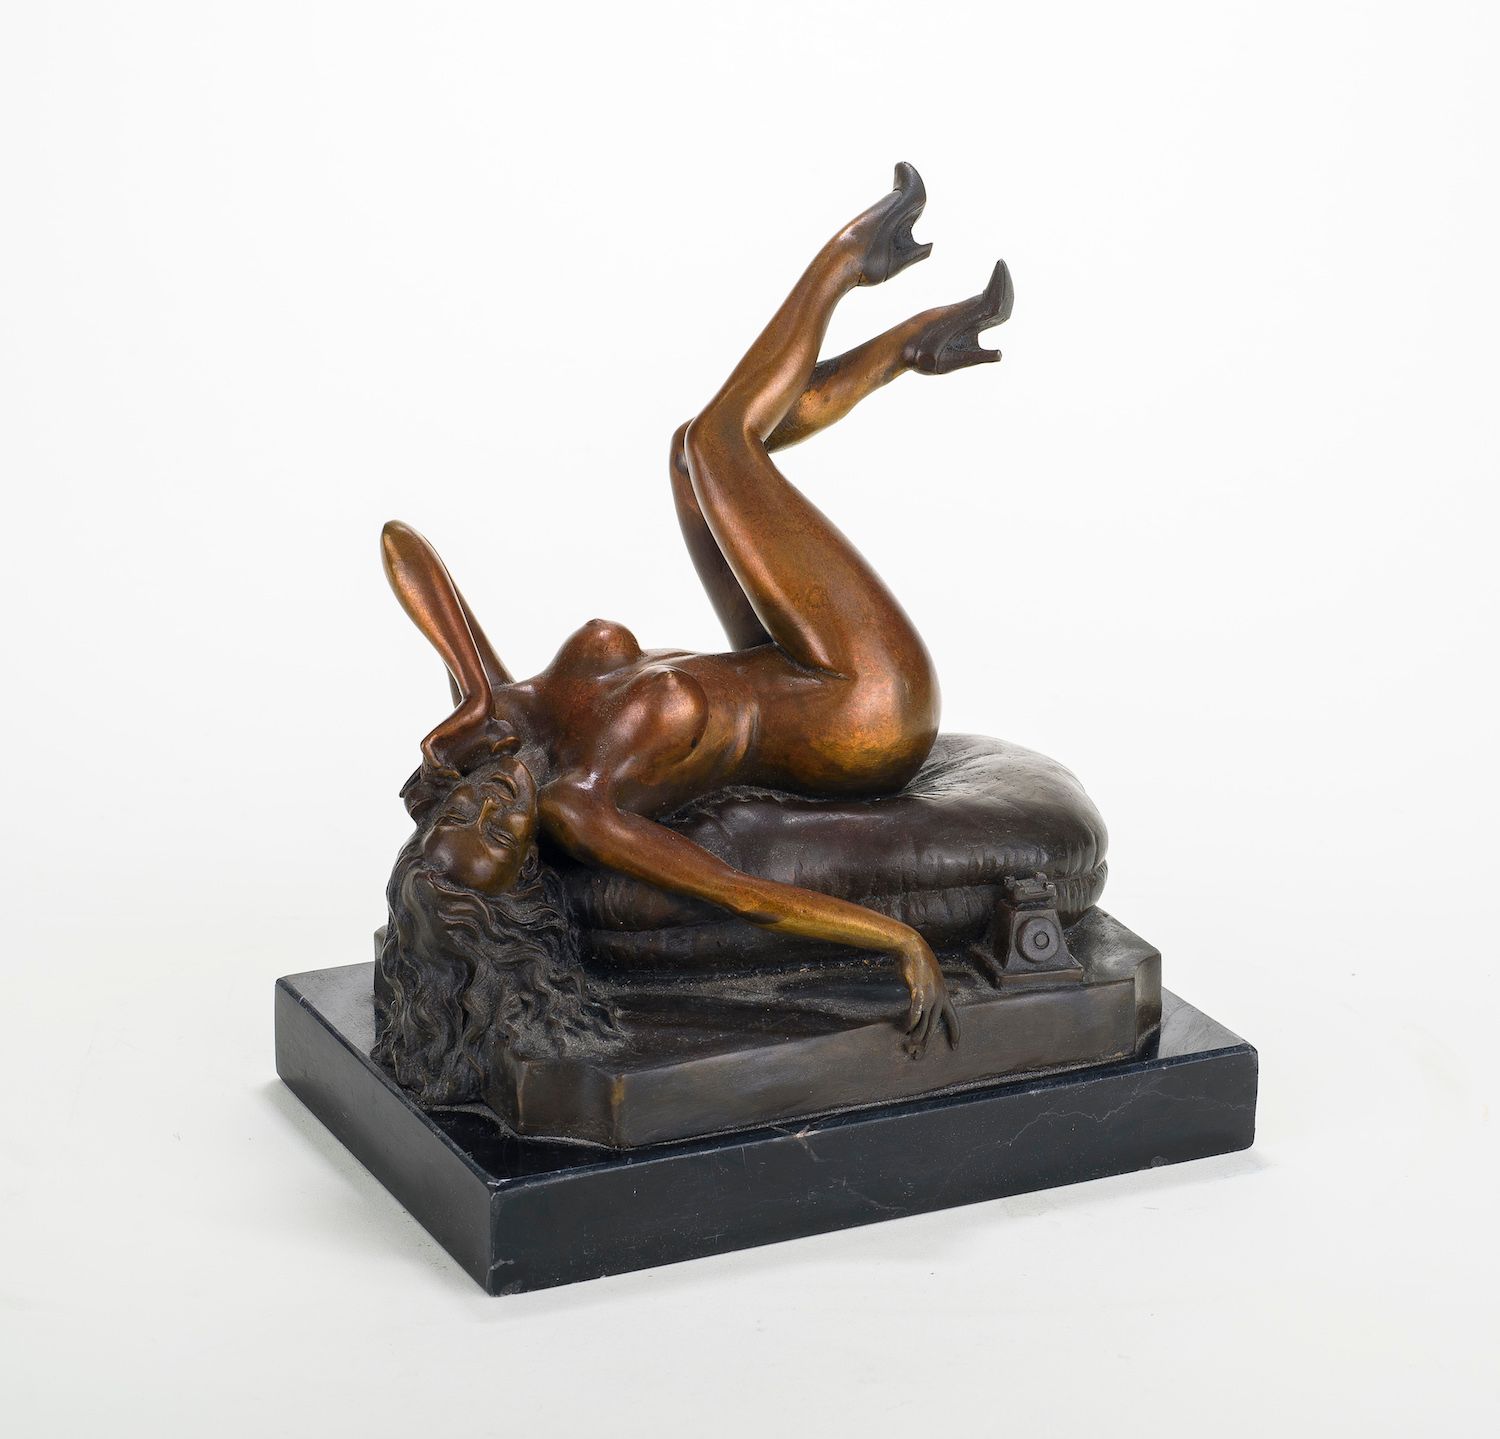 Null French school around 1900

Naked woman lying on a cushion

Bronze, double p&hellip;